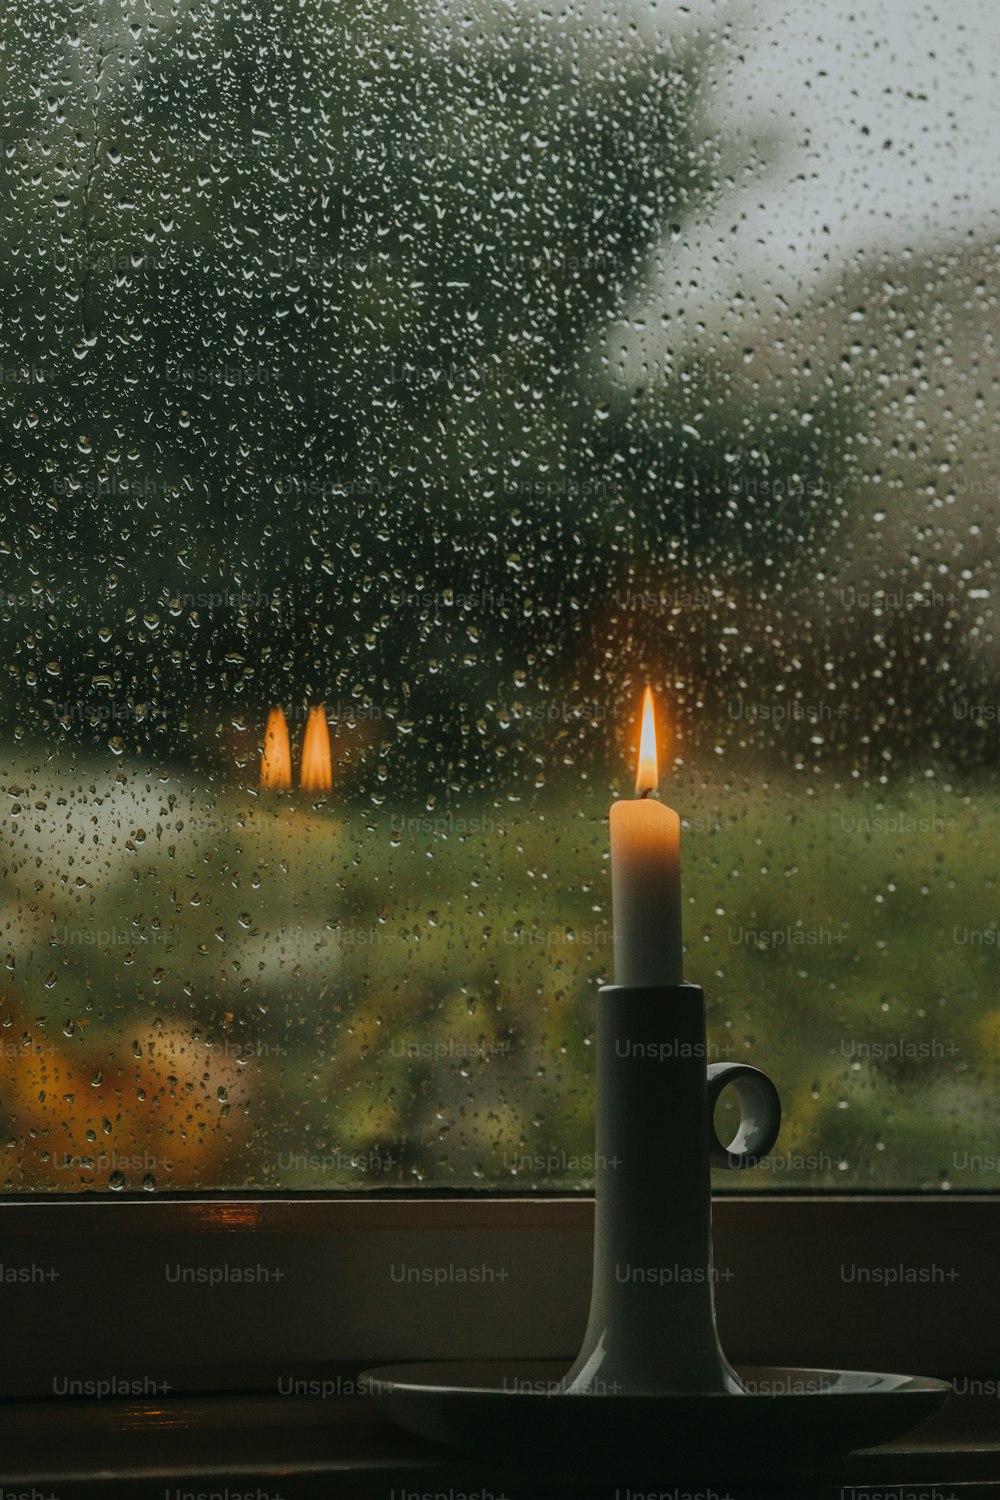 350+ Rainy Day Pictures [HQ]  Download Free Images & Stock Photos on  Unsplash